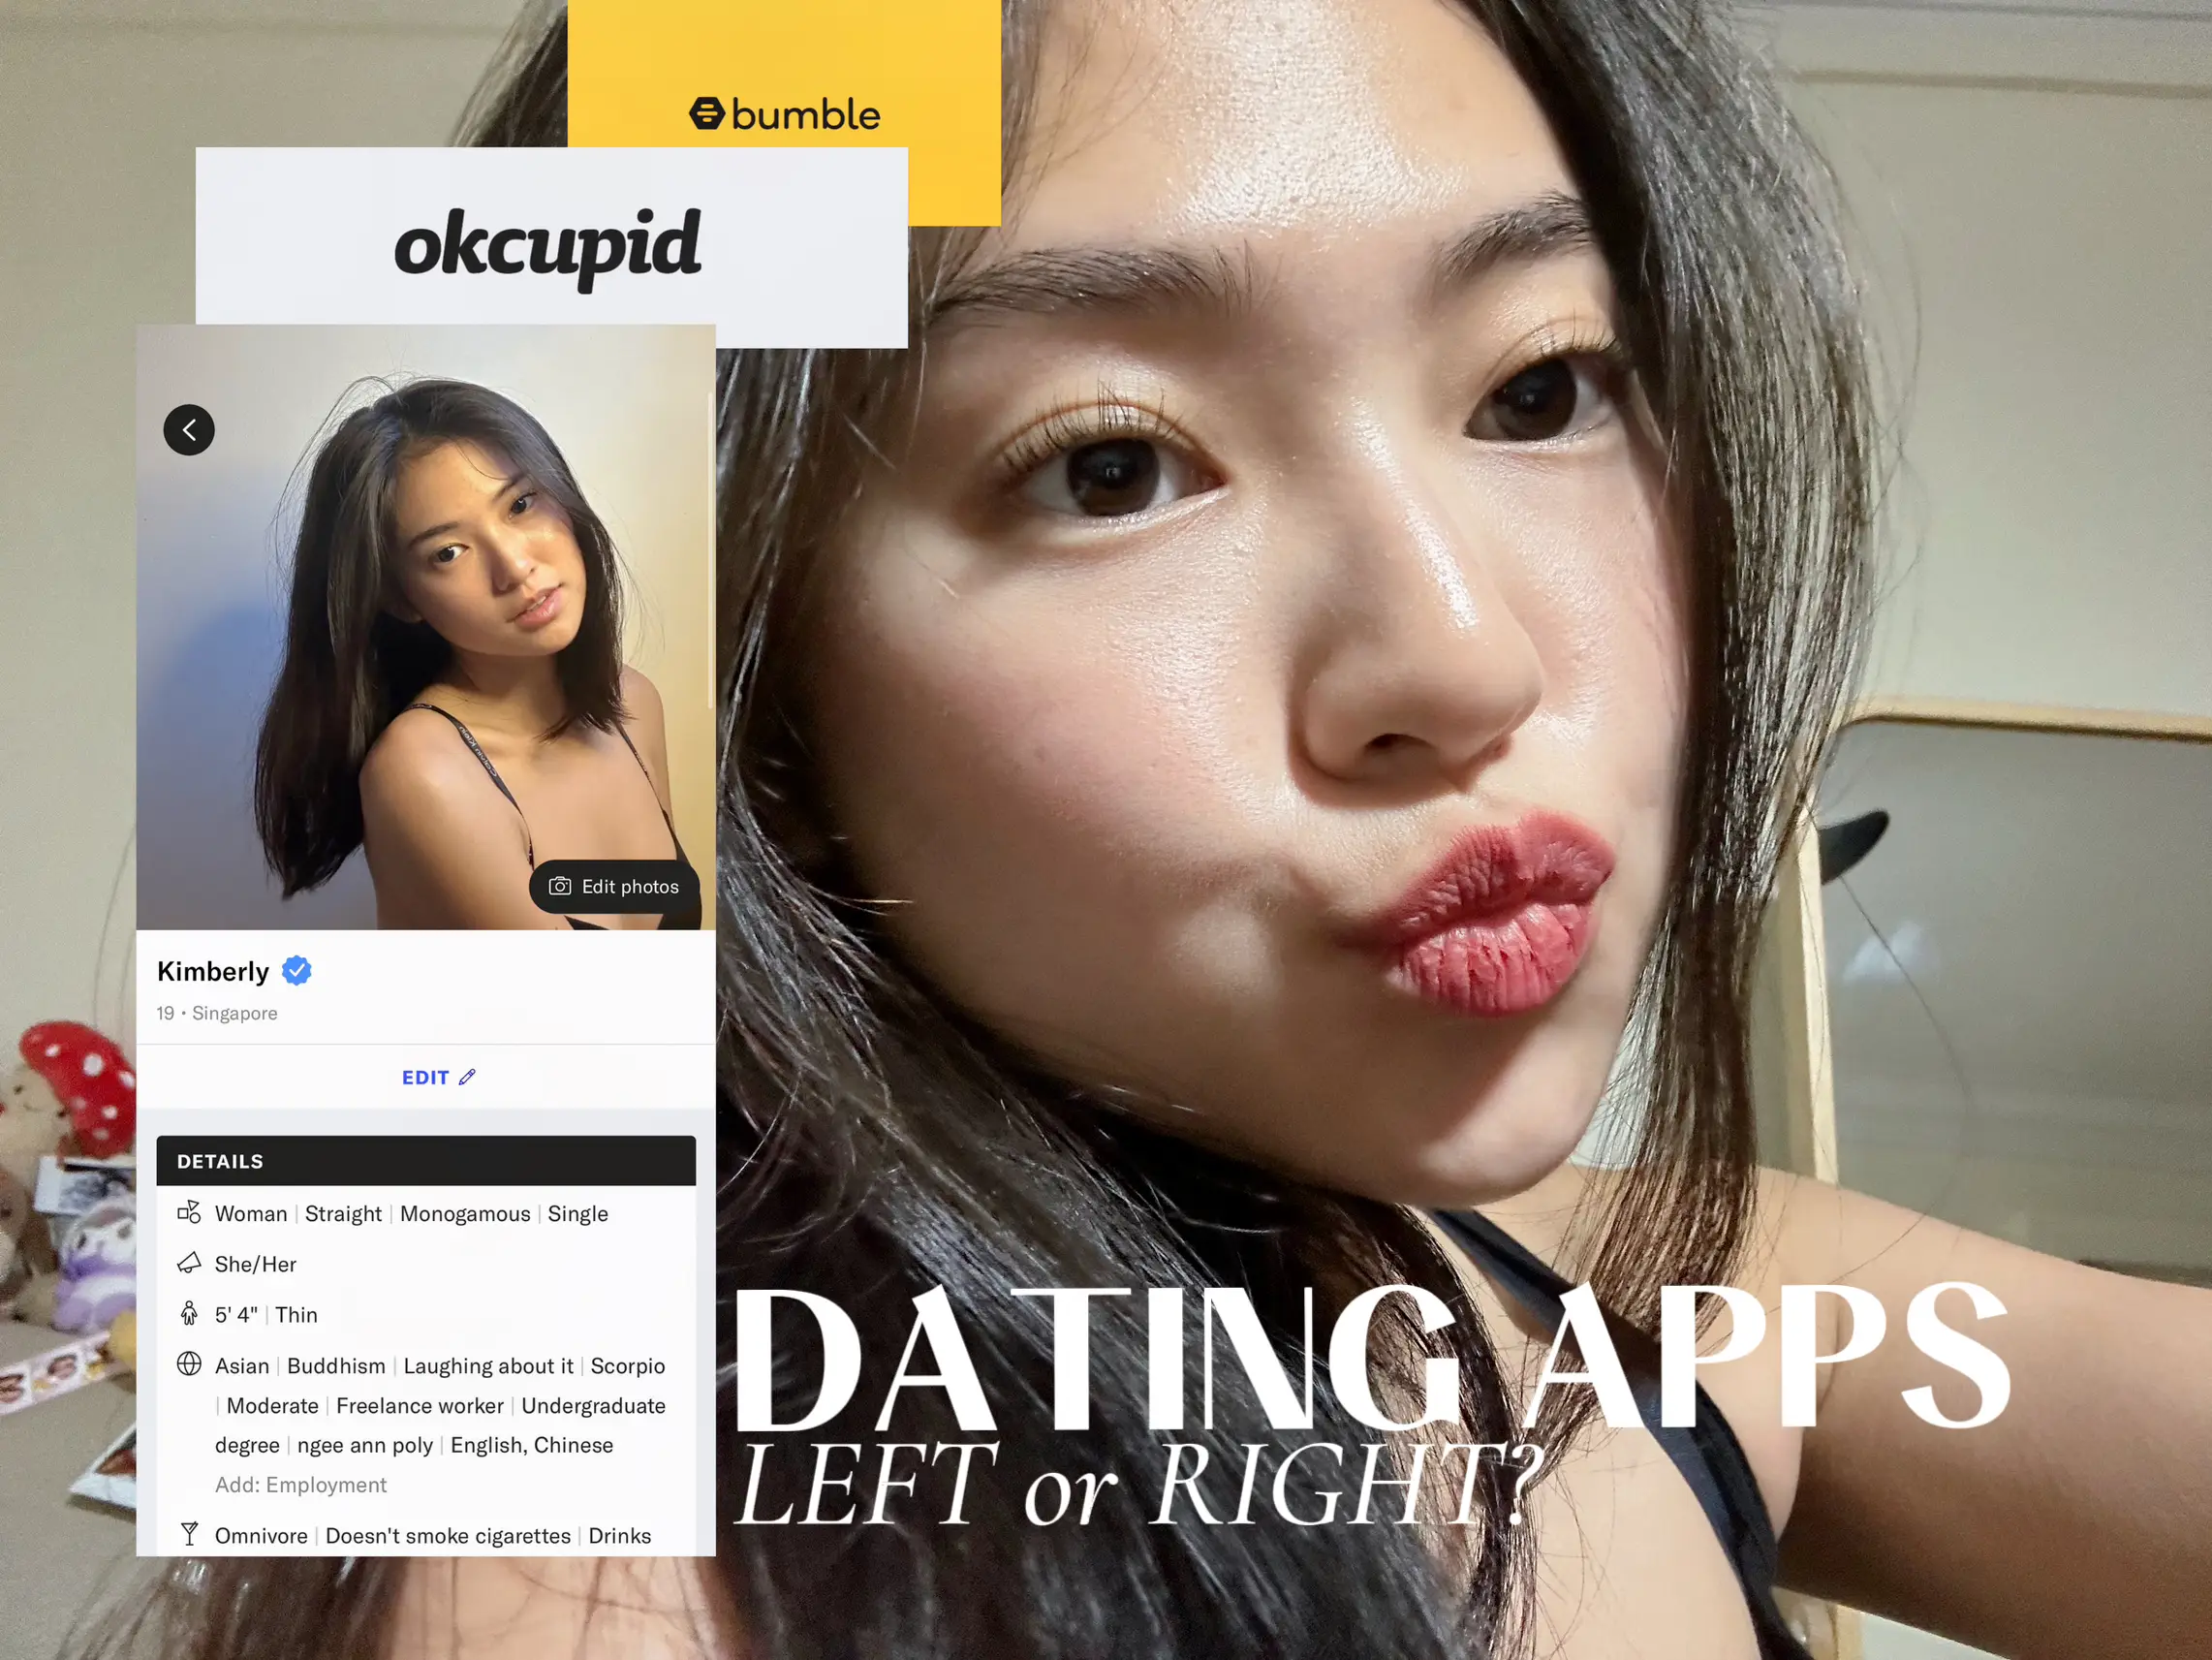 finding love | dating apps ˚ ༘♡ ⋆｡˚'s images(0)